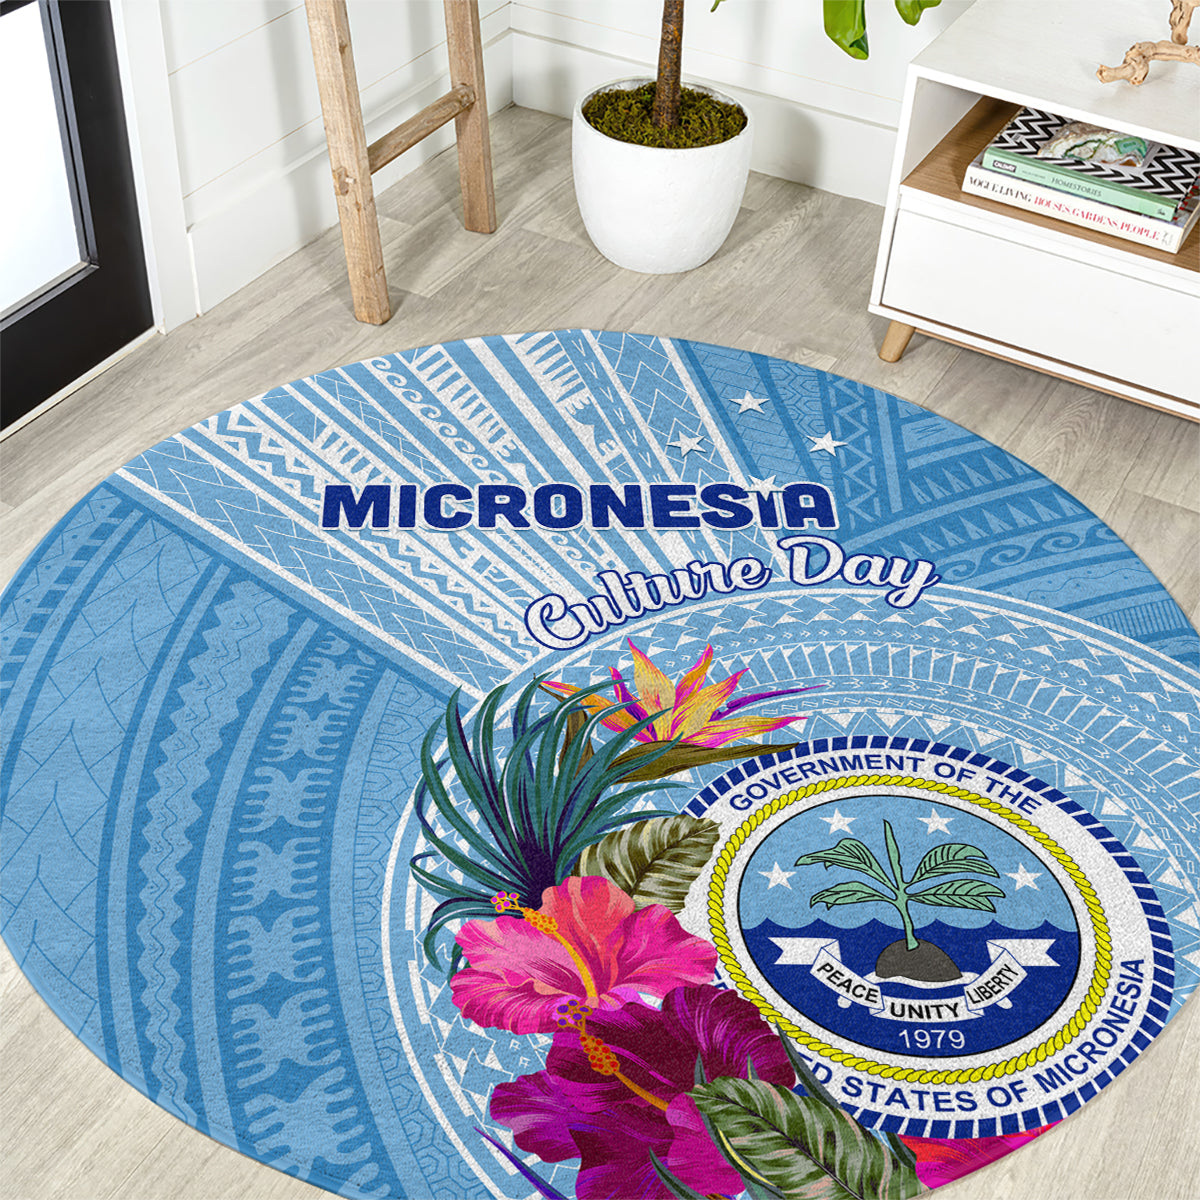 Micronesia Culture Day Round Carpet Tribal Pattern Tropical Style LT01 Blue - Polynesian Pride